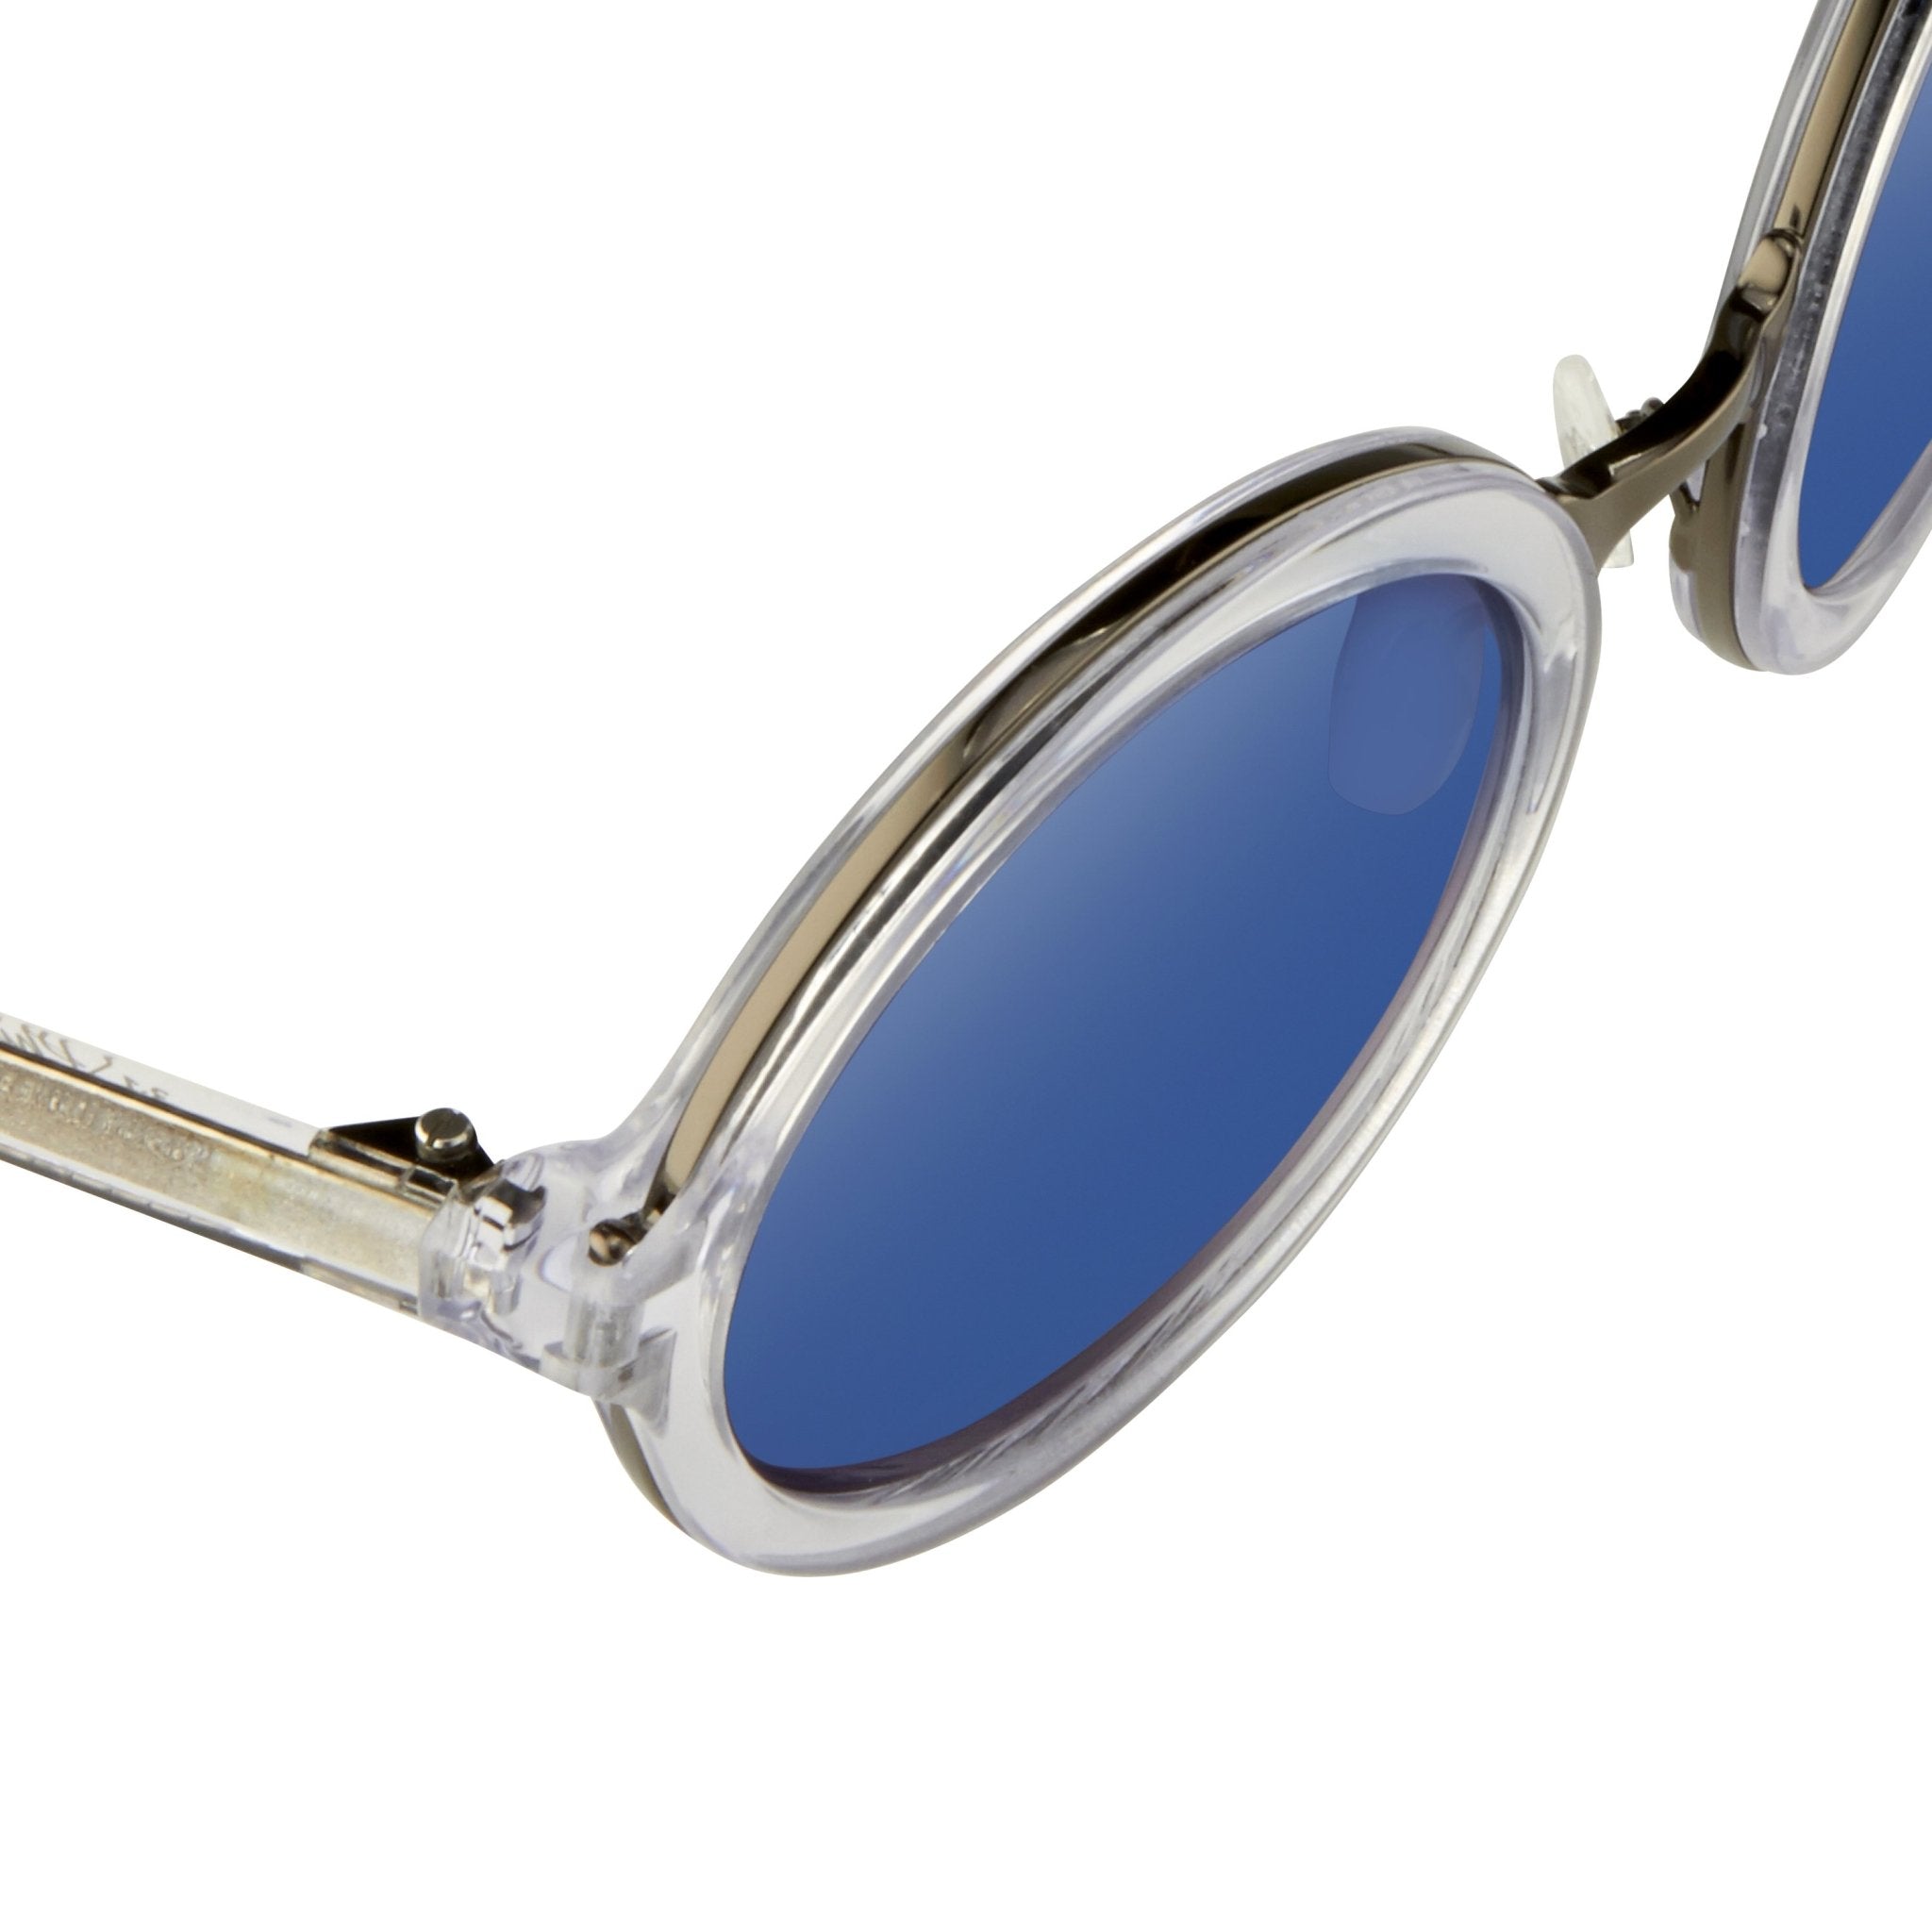 Phillip Lim Sunglasses Round Female Clear and Gun Metal with CAT3 Blue Mirror Lenses - PL11C25SUN - Watches & Crystals